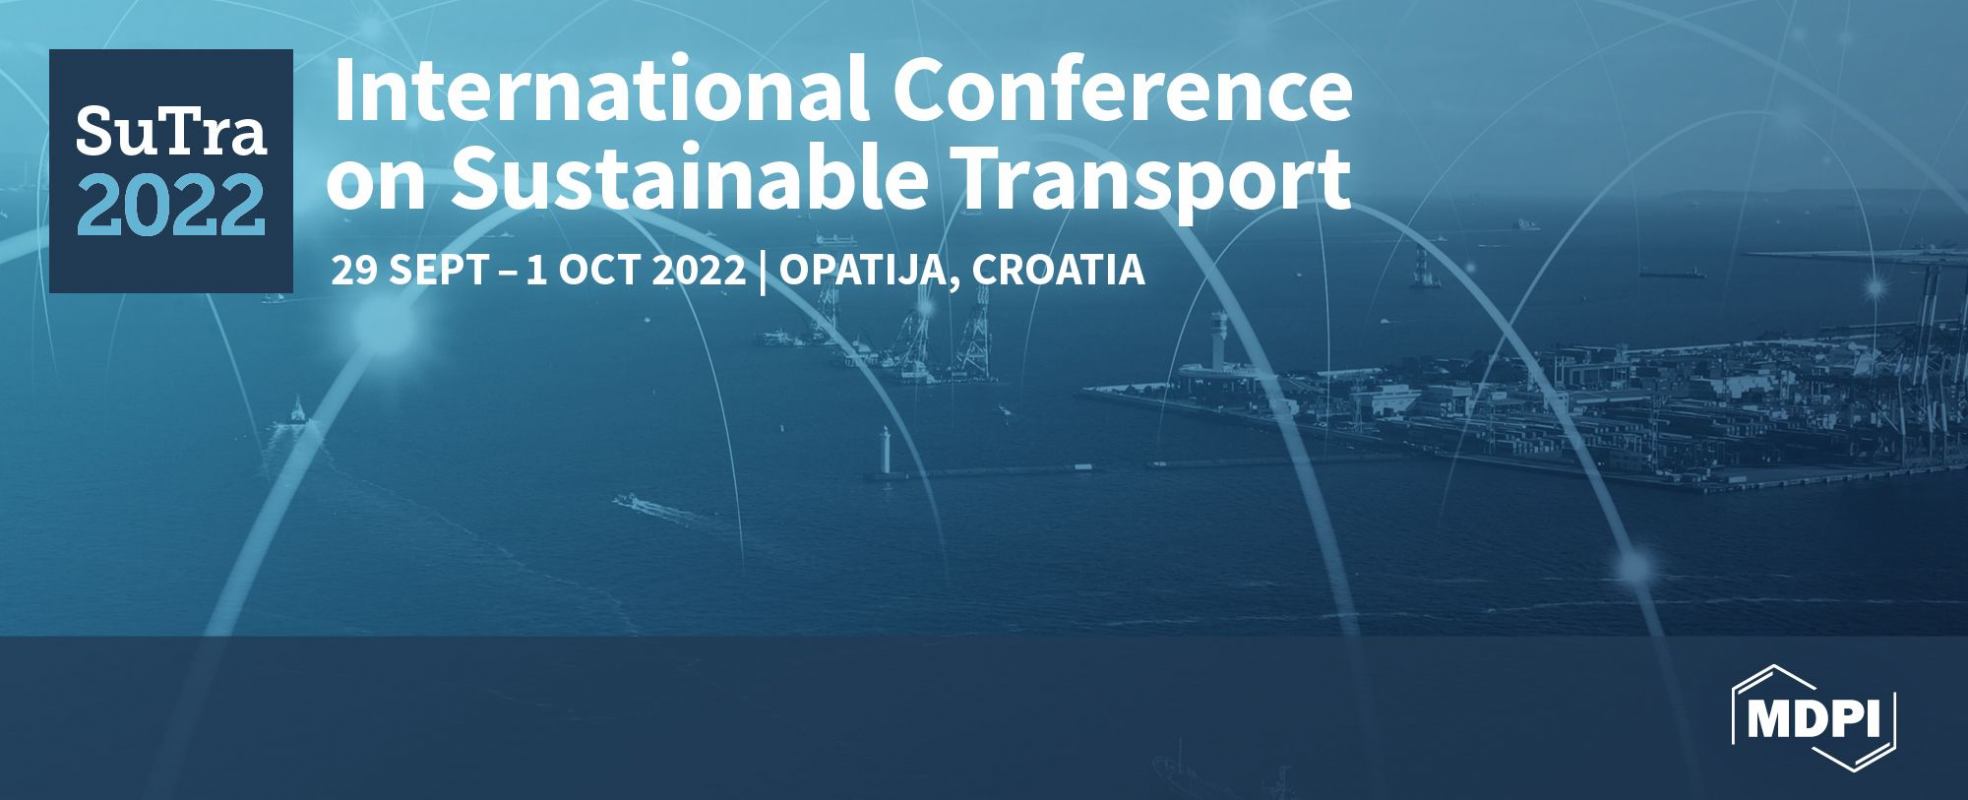 Conference on Sustainable Transport - SuTra 2022